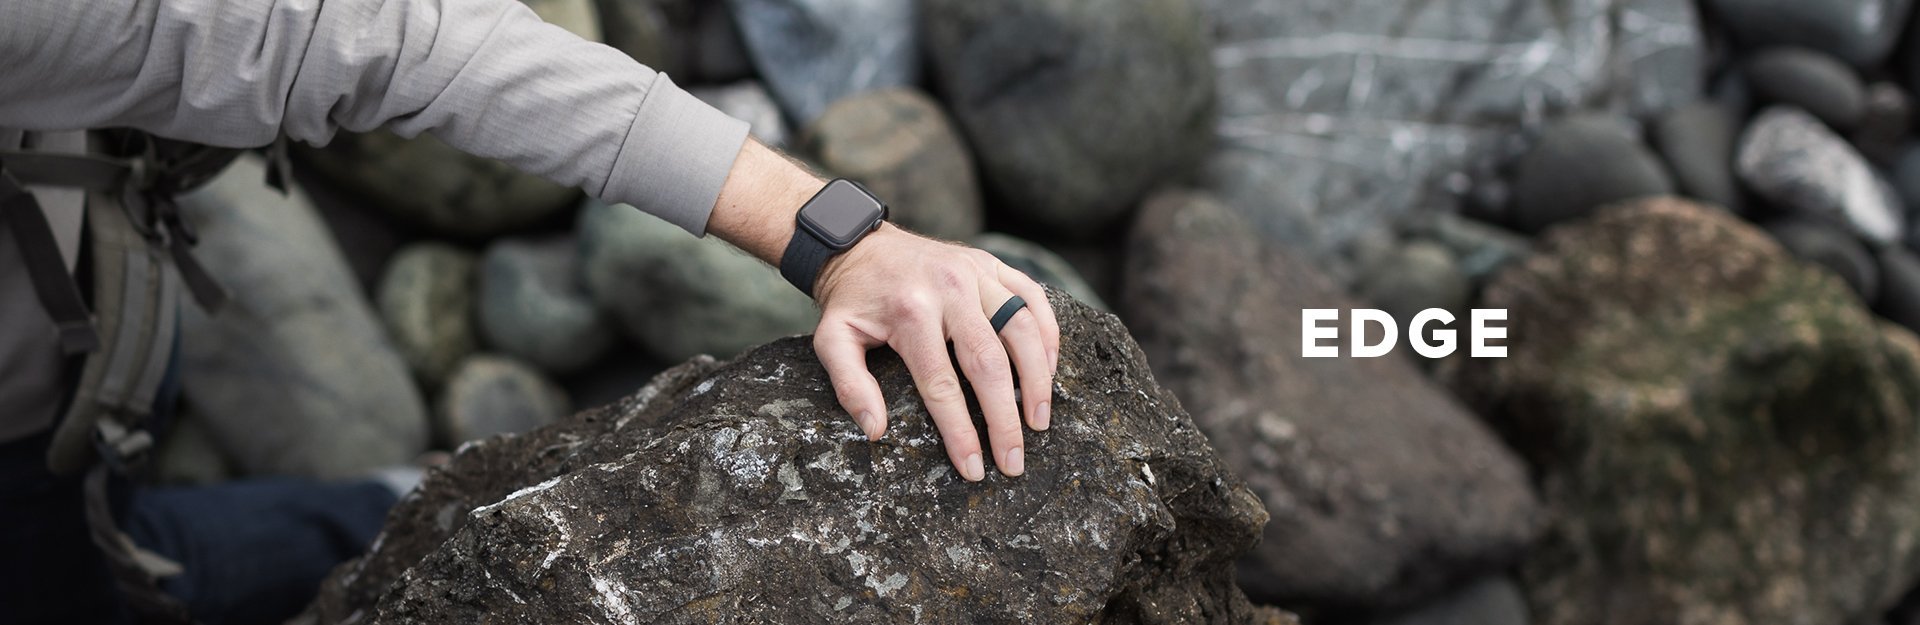 A man wearing an edge ring and black watch band climbs up some rocks